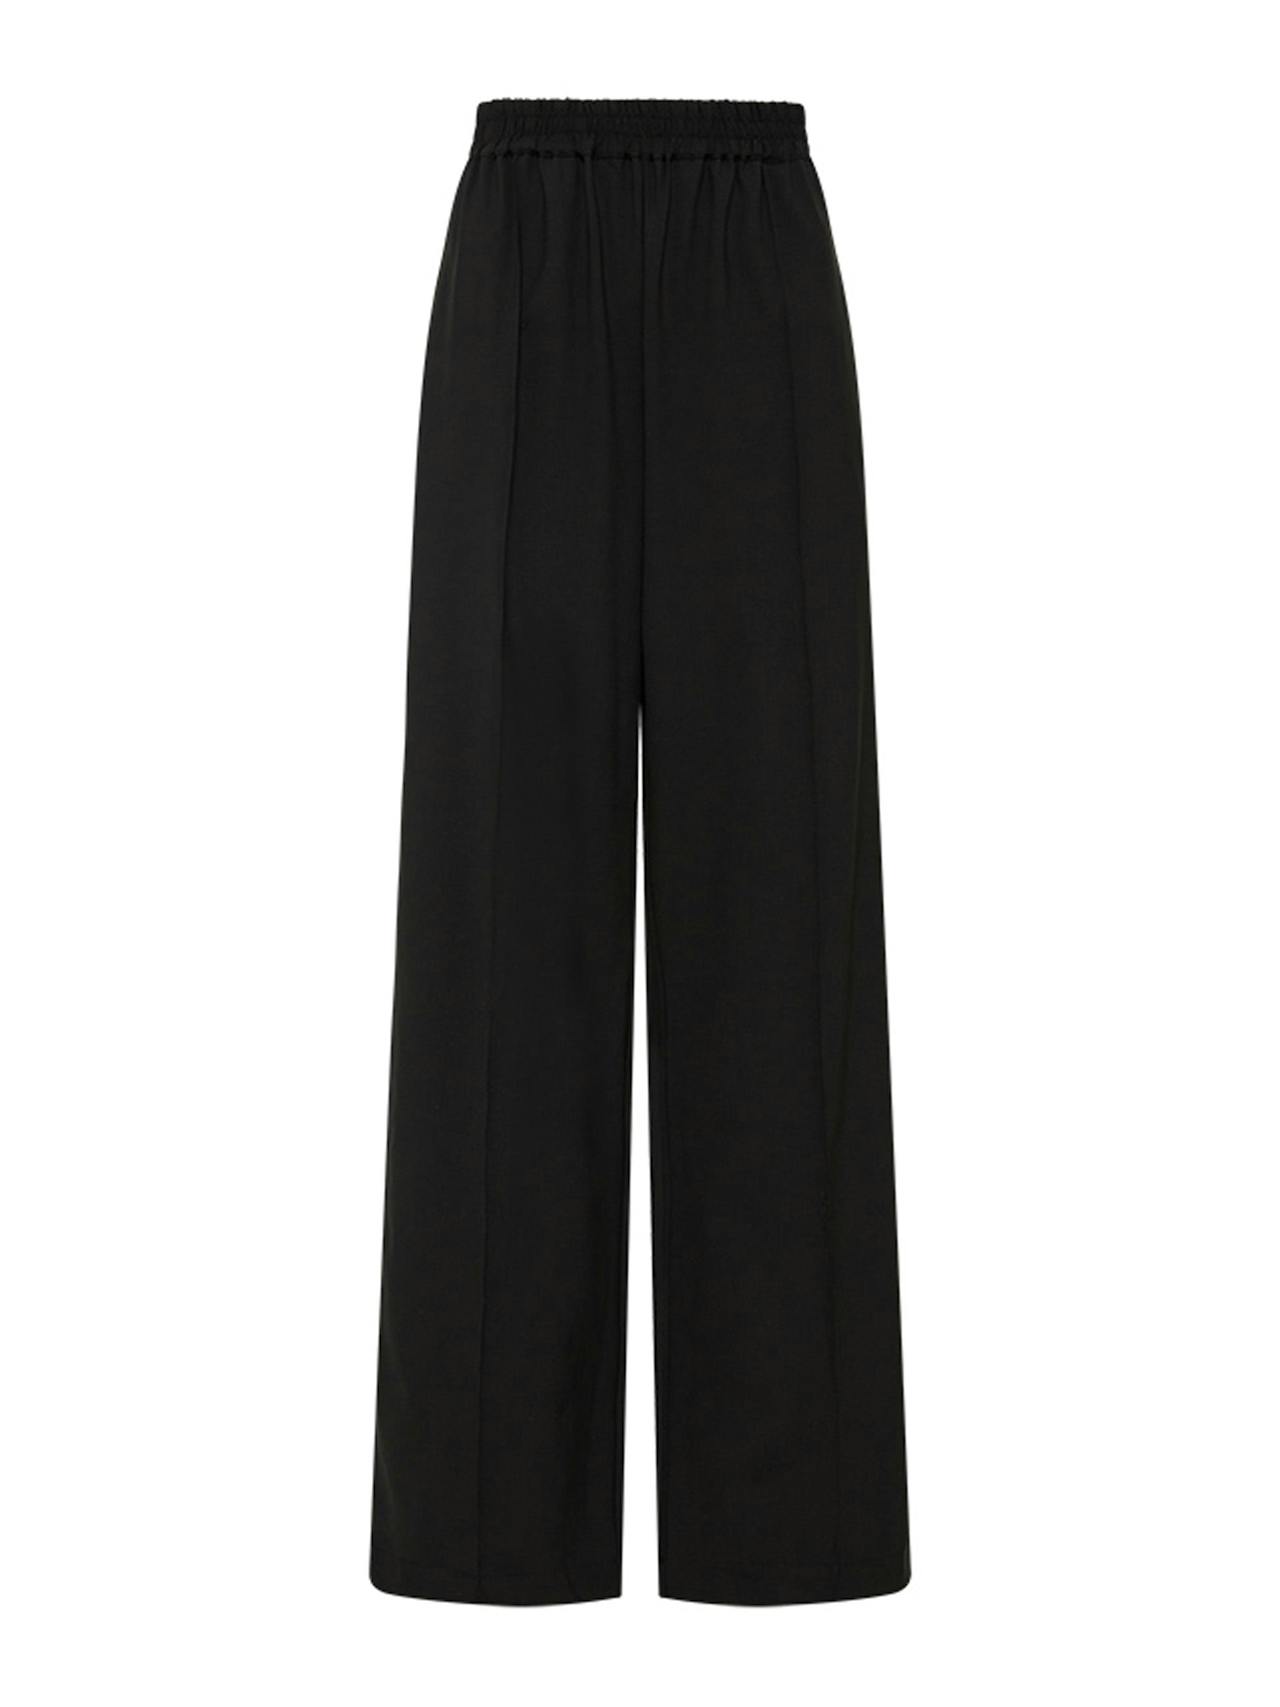 Black relaxed pin-stitch trousers